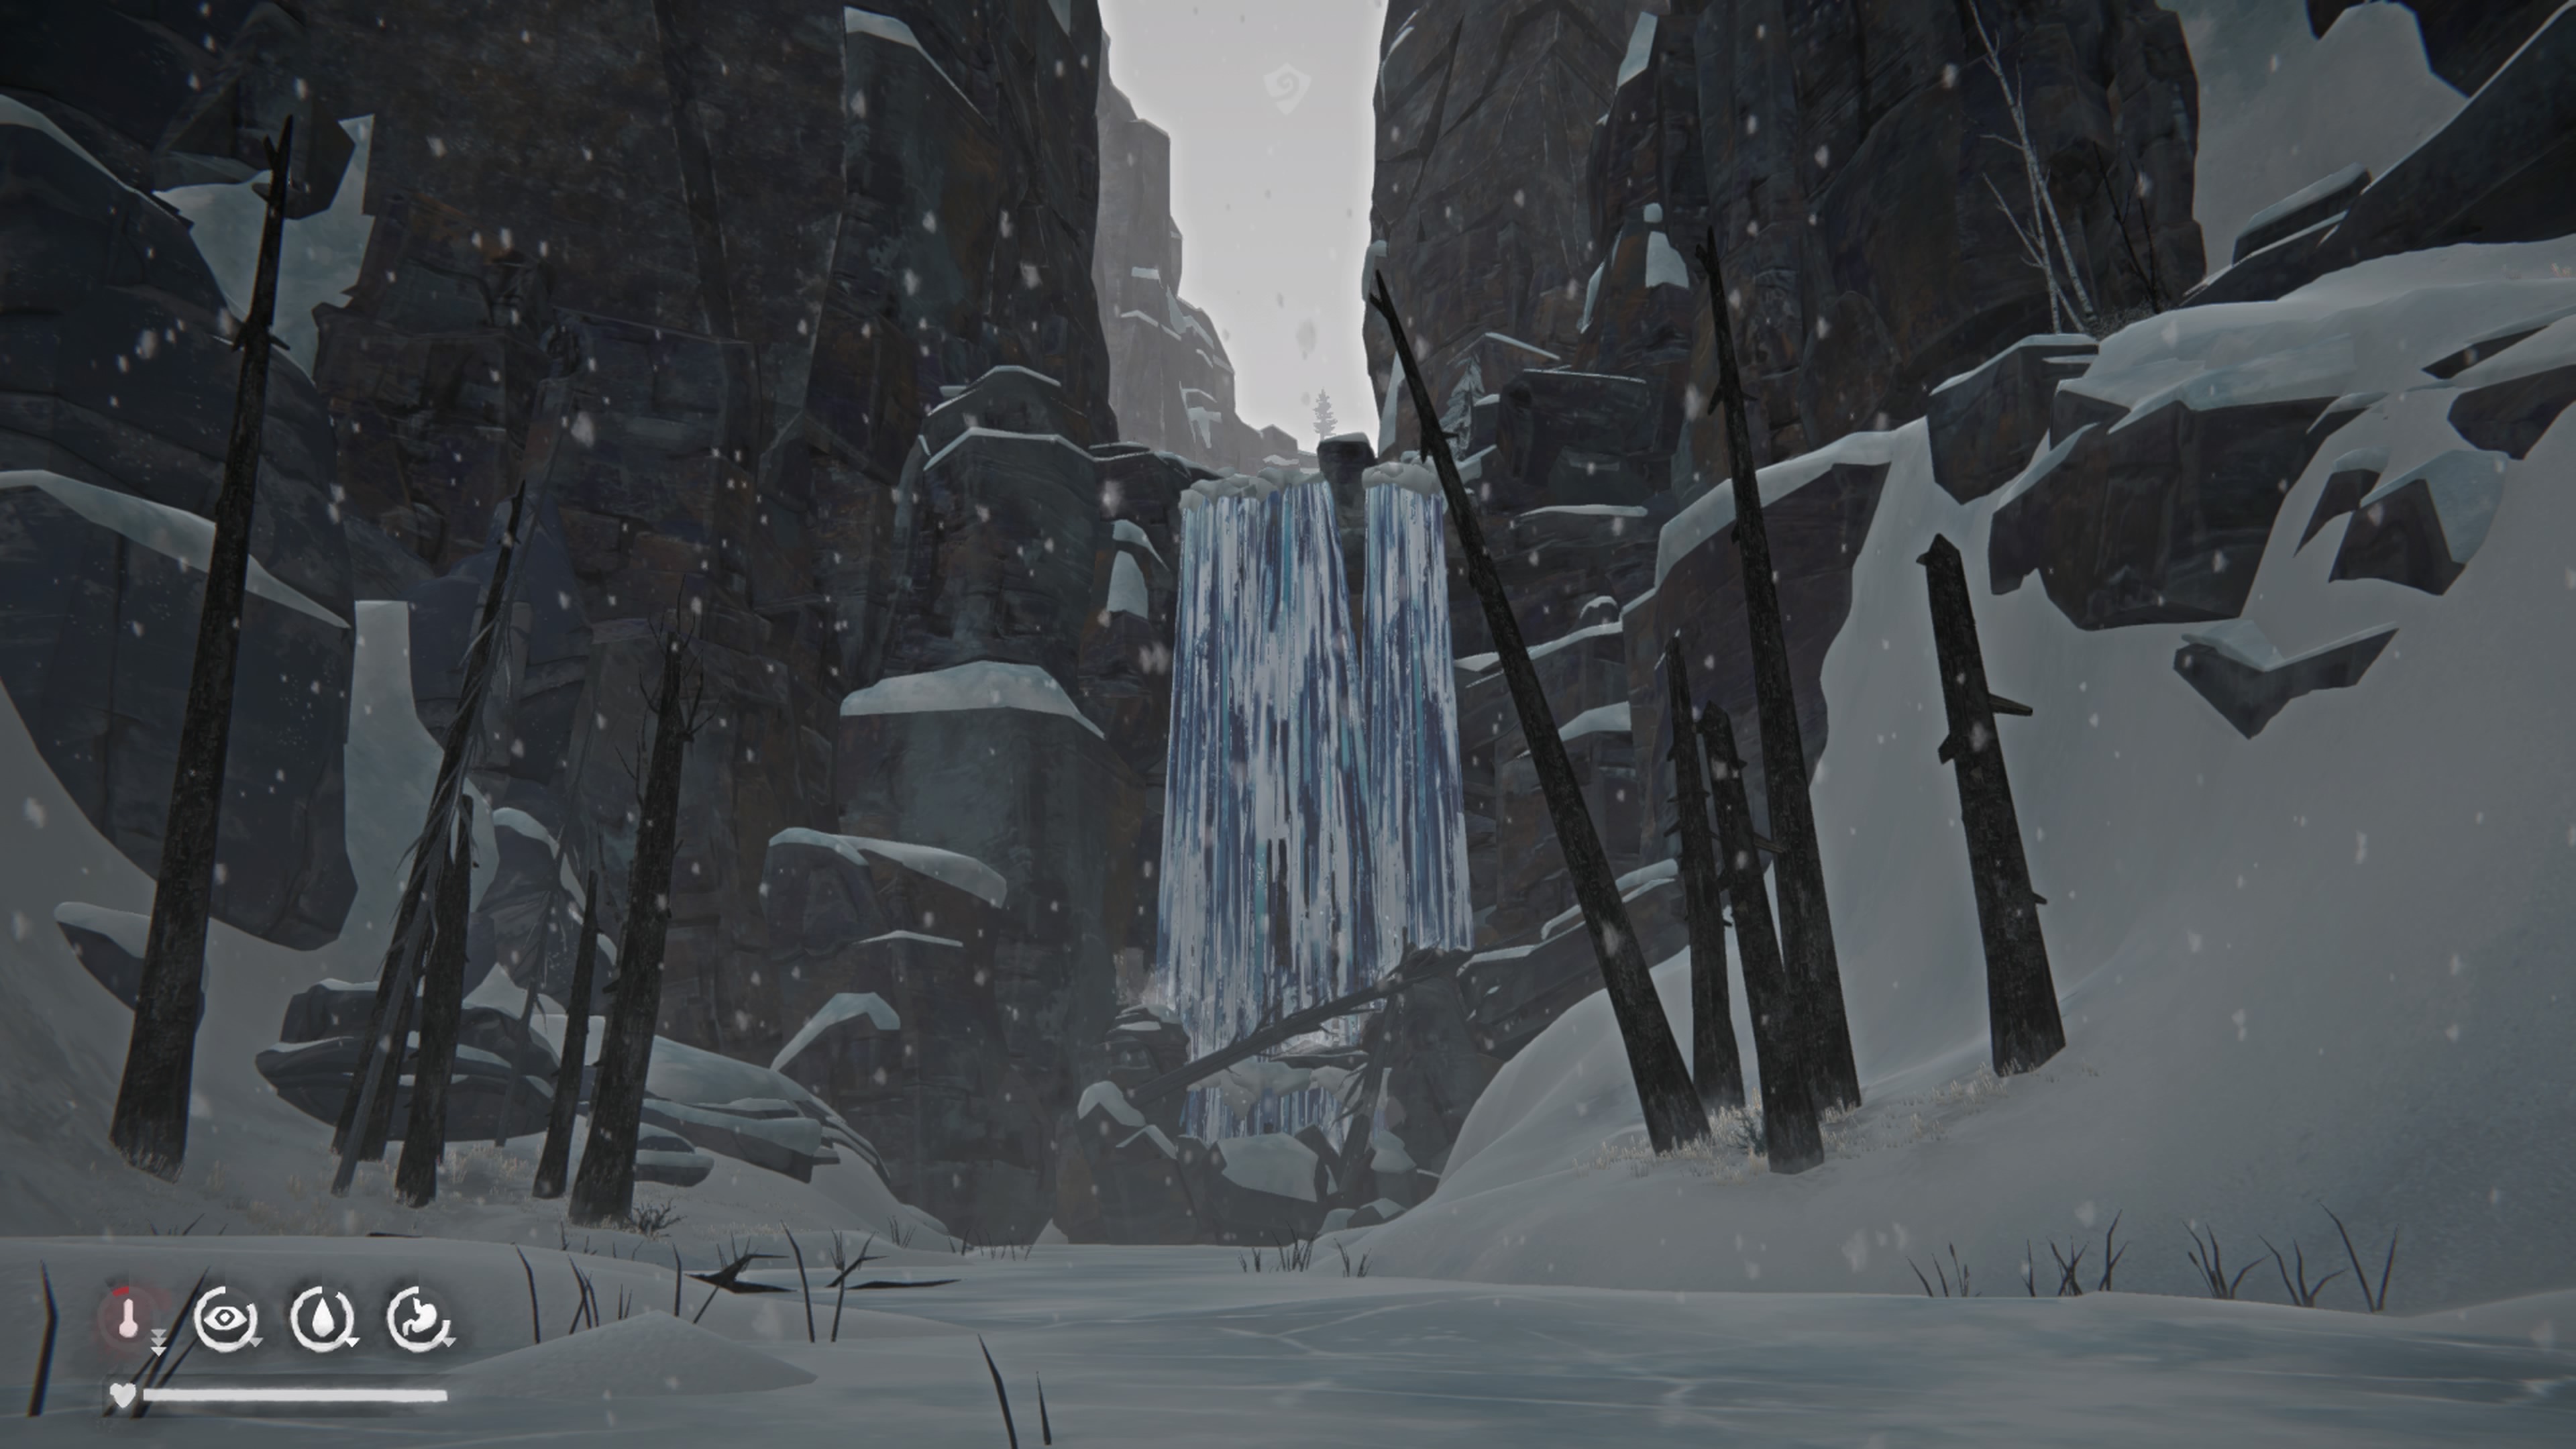 there's a waterfall between rocks in a snowy setting between bare tree trunks, and in the left hand corner on the screen there are four circles with icons inside them to track the temperature, energy, thirst and hunger of the character